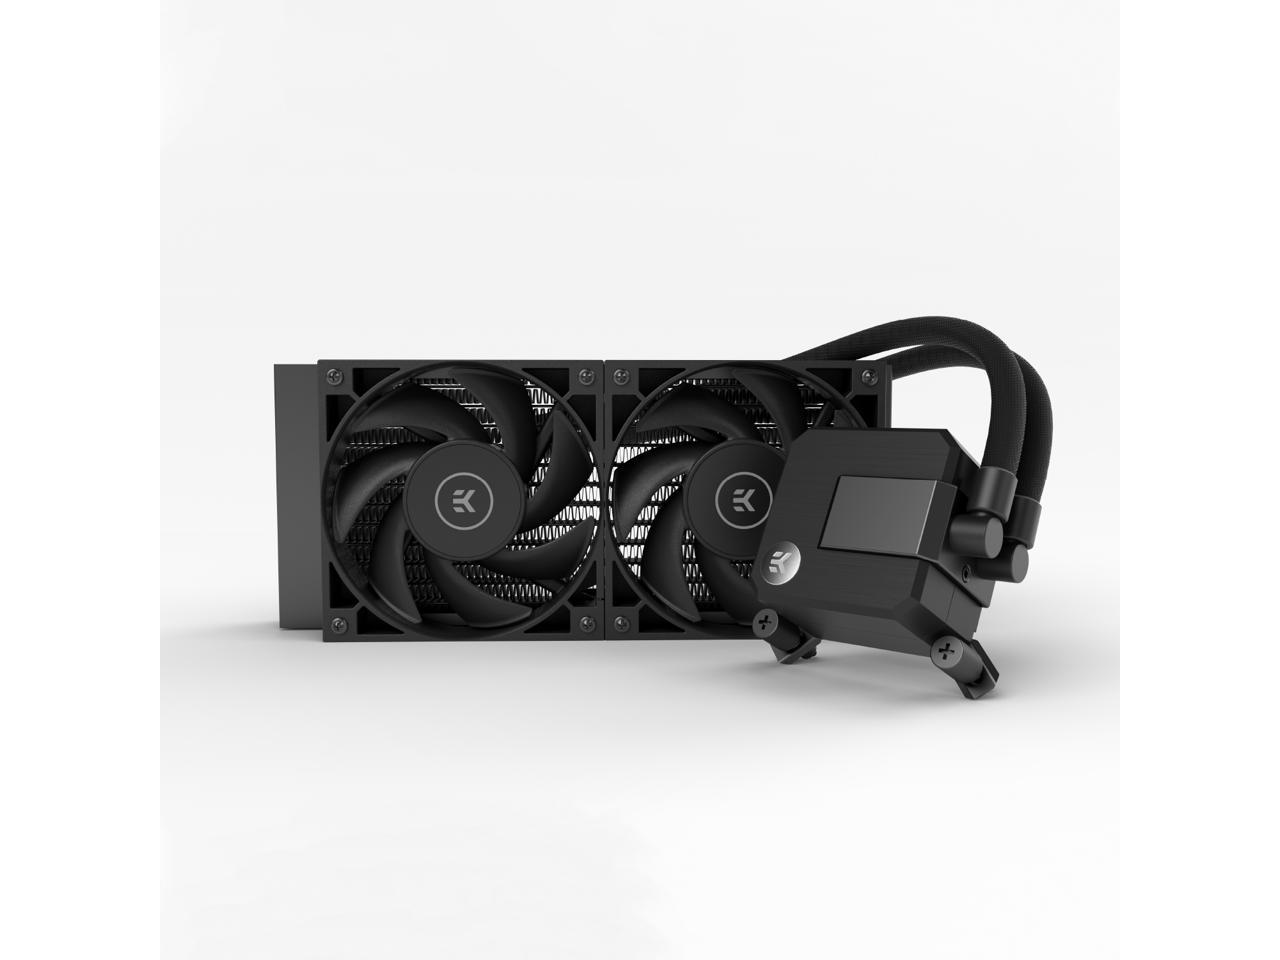 EK 240mm AIO Basic, All-in-One Liquid CPU Cooler with EK-Vardar High-Performance PMW Fans, Water Cooling Computer Parts, 120mm Fan, Intel 115X/1200/2066, AMD AM4, (240mm AIO) LGA 1700 Compatible 水冷